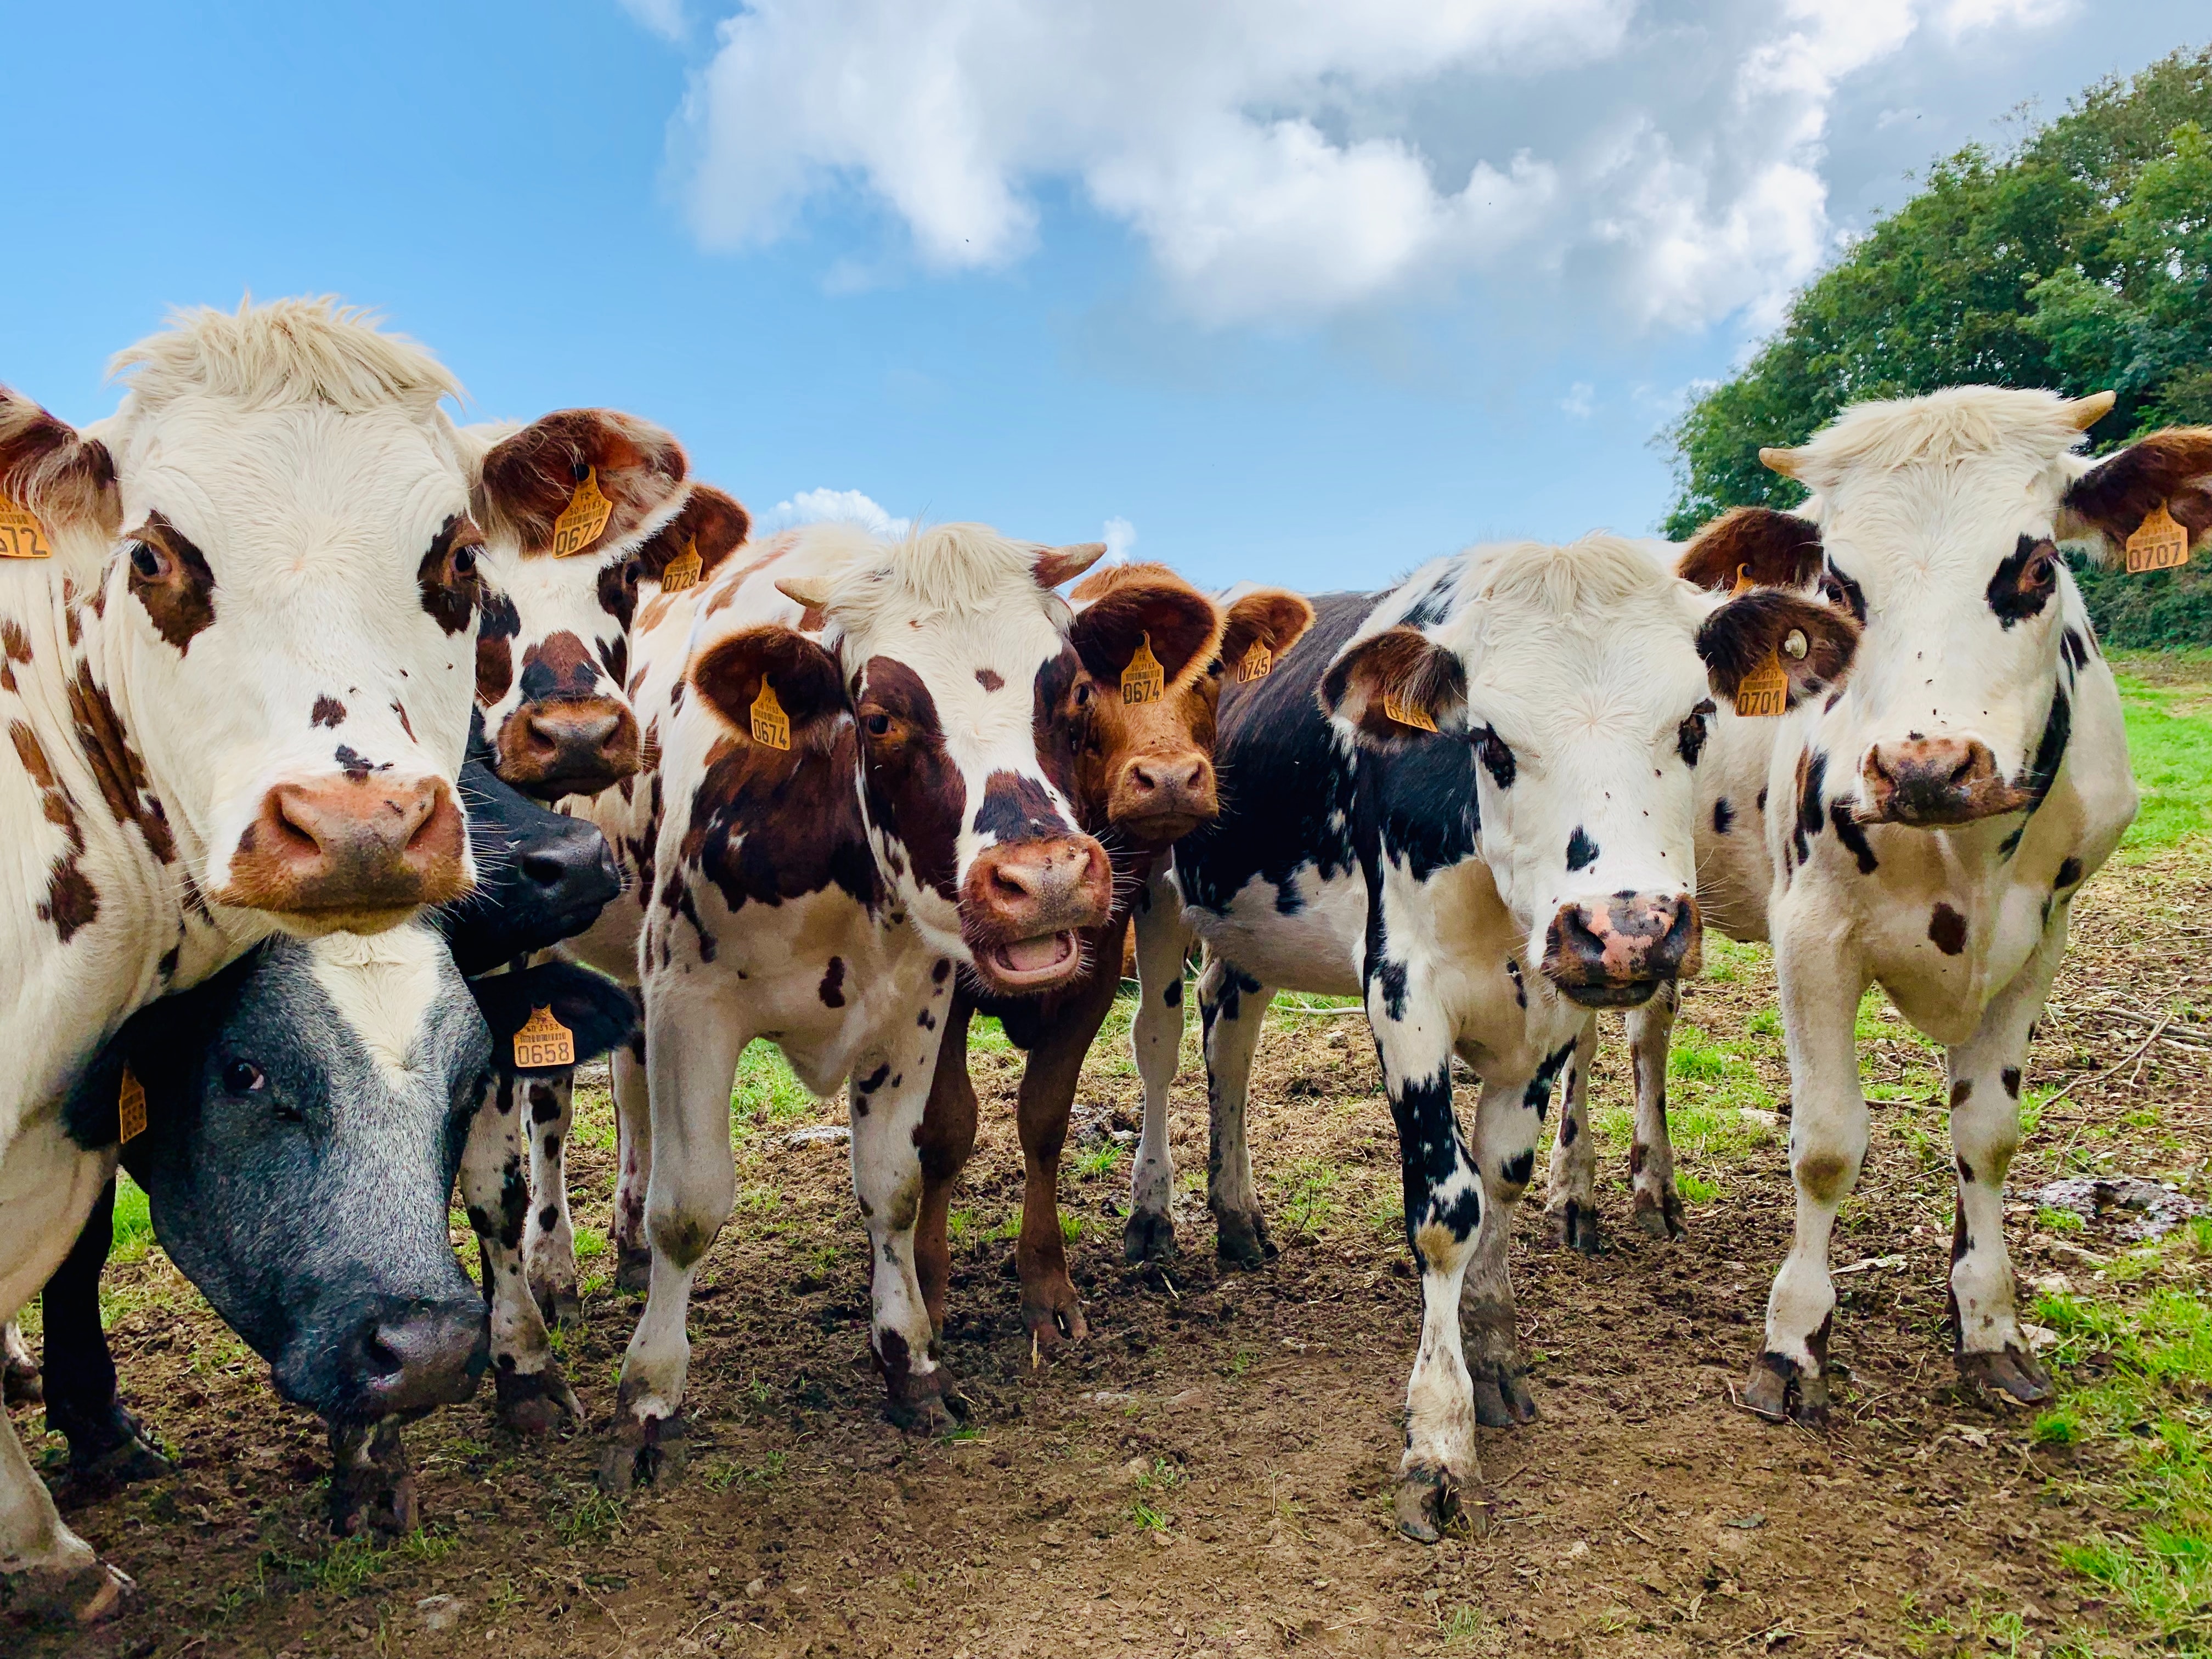 Image of a group of cows